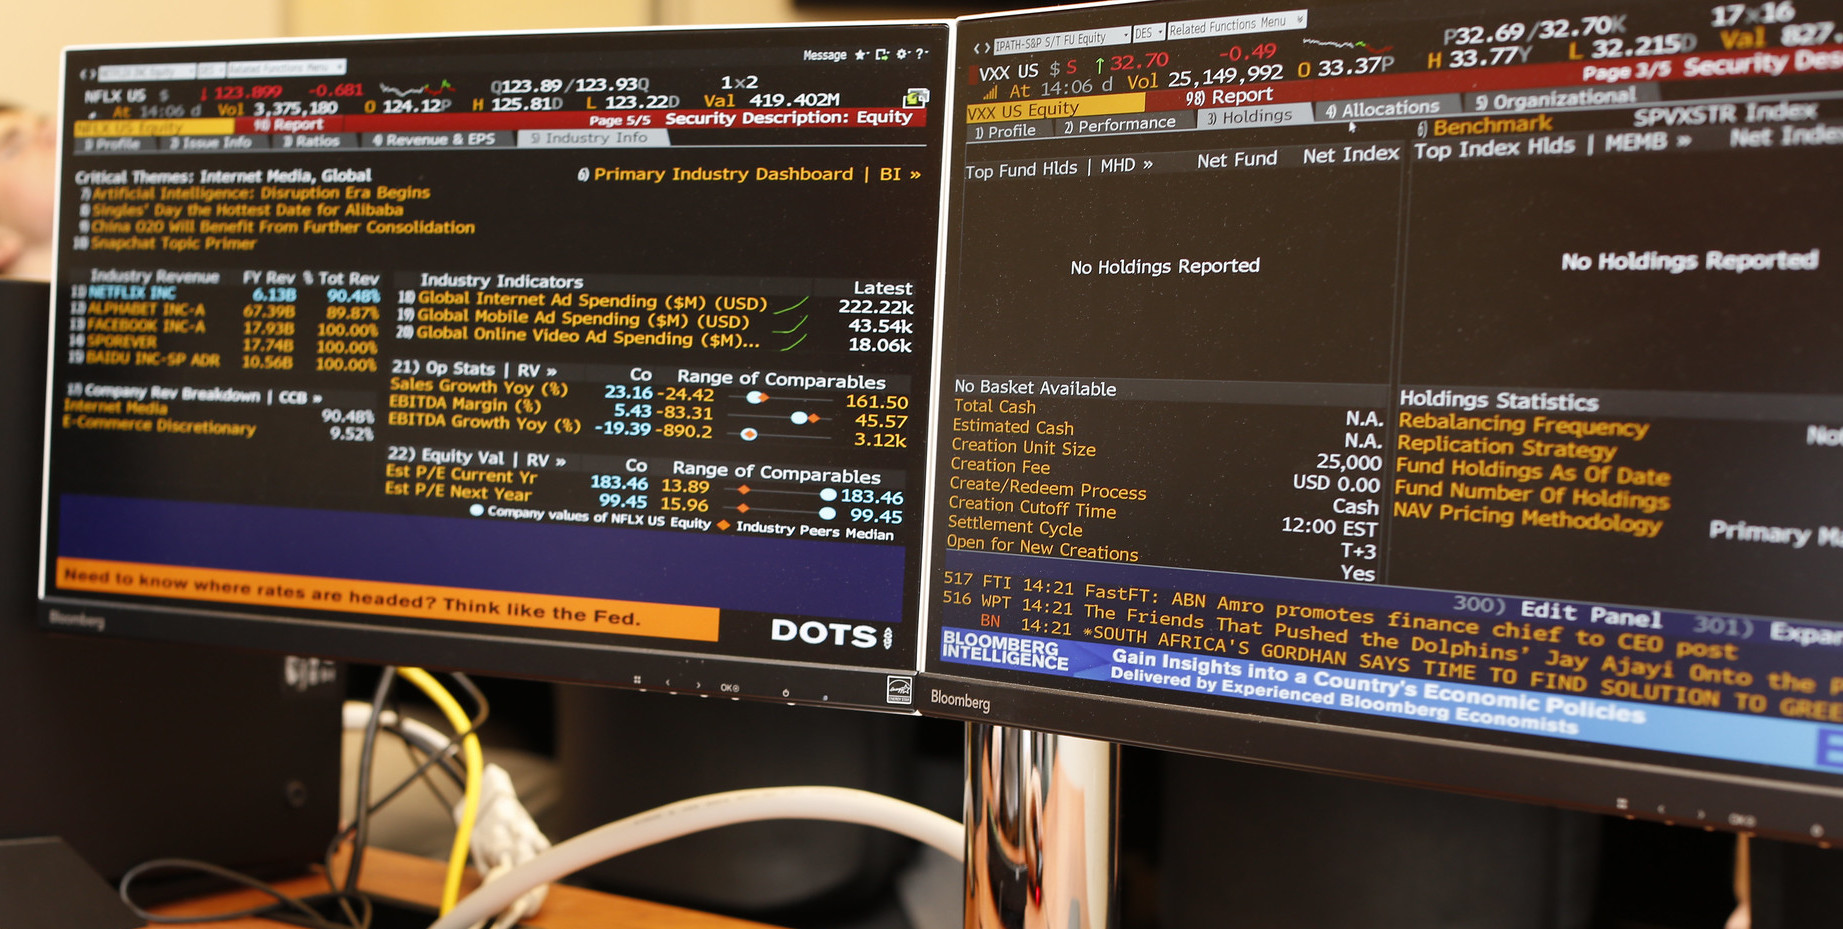 Computer screens show business and stock information.